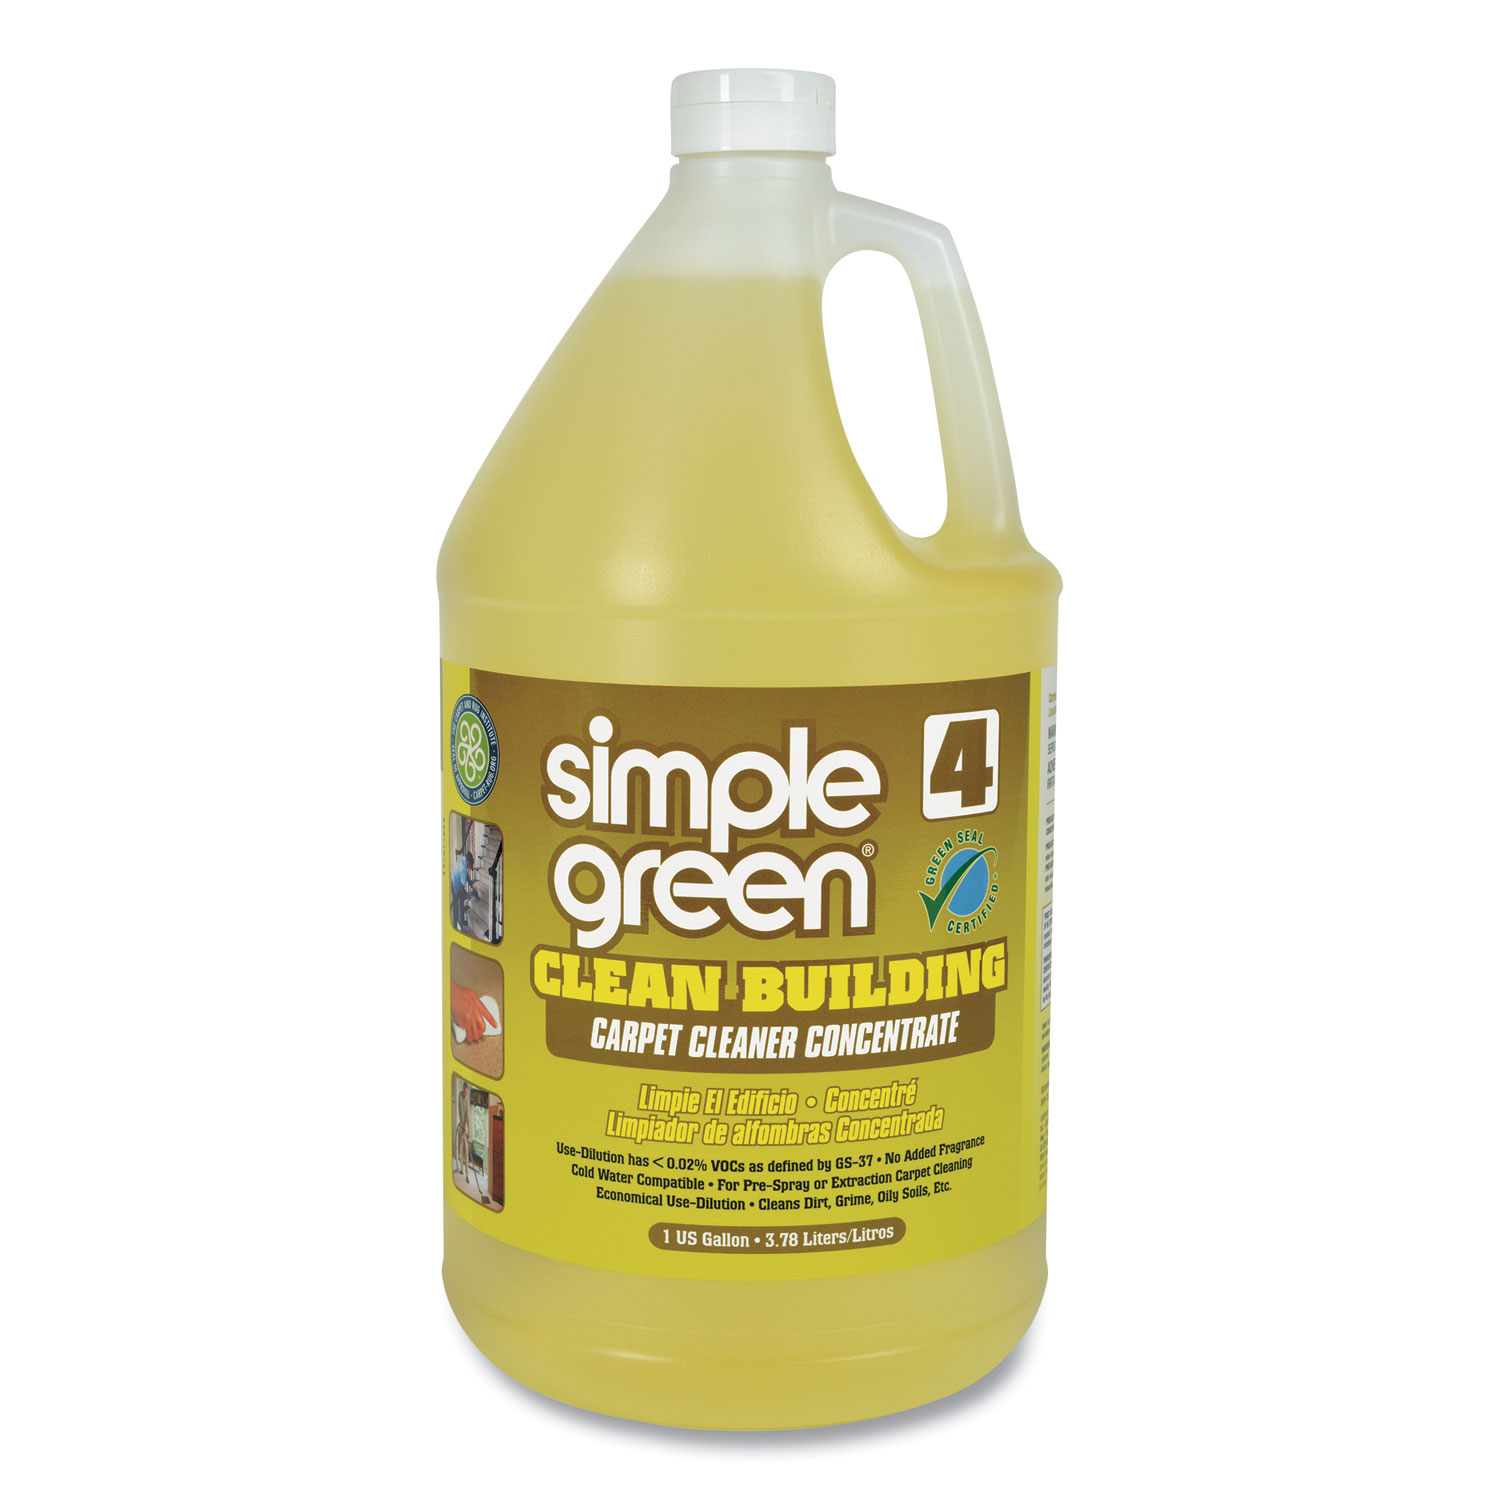  Simple Green 1210000211201 Clean Building Carpet Cleaner Concentrate, Unscented, 1gal Bottle (SMP11201) 